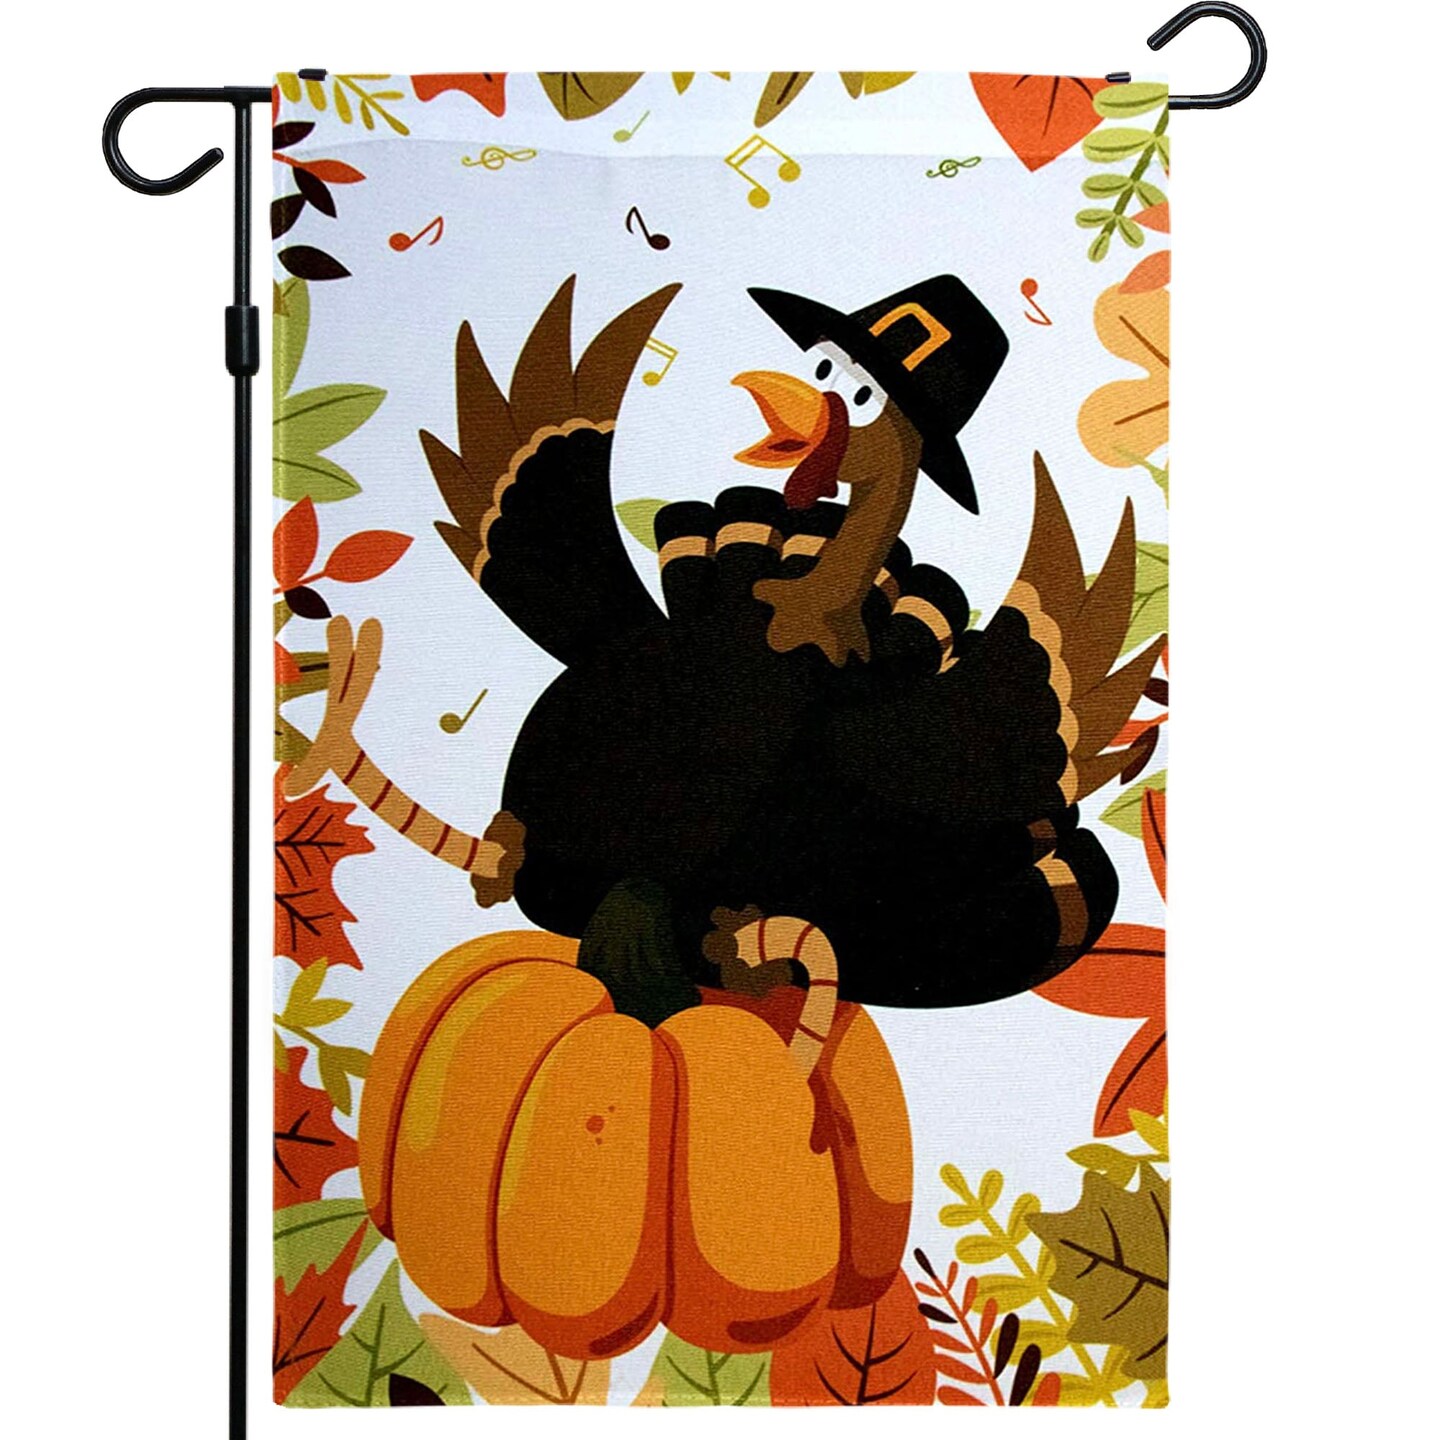 G128 - Home Decorative Thanksgiving Garden Flag, Joyful Pilgrim Turkey with Pumpkin and Maple Leaves Decorations,  | 12x18 Inch | Printed 150D Polyester - Rustic Holiday Seasonal Outdoor Flag